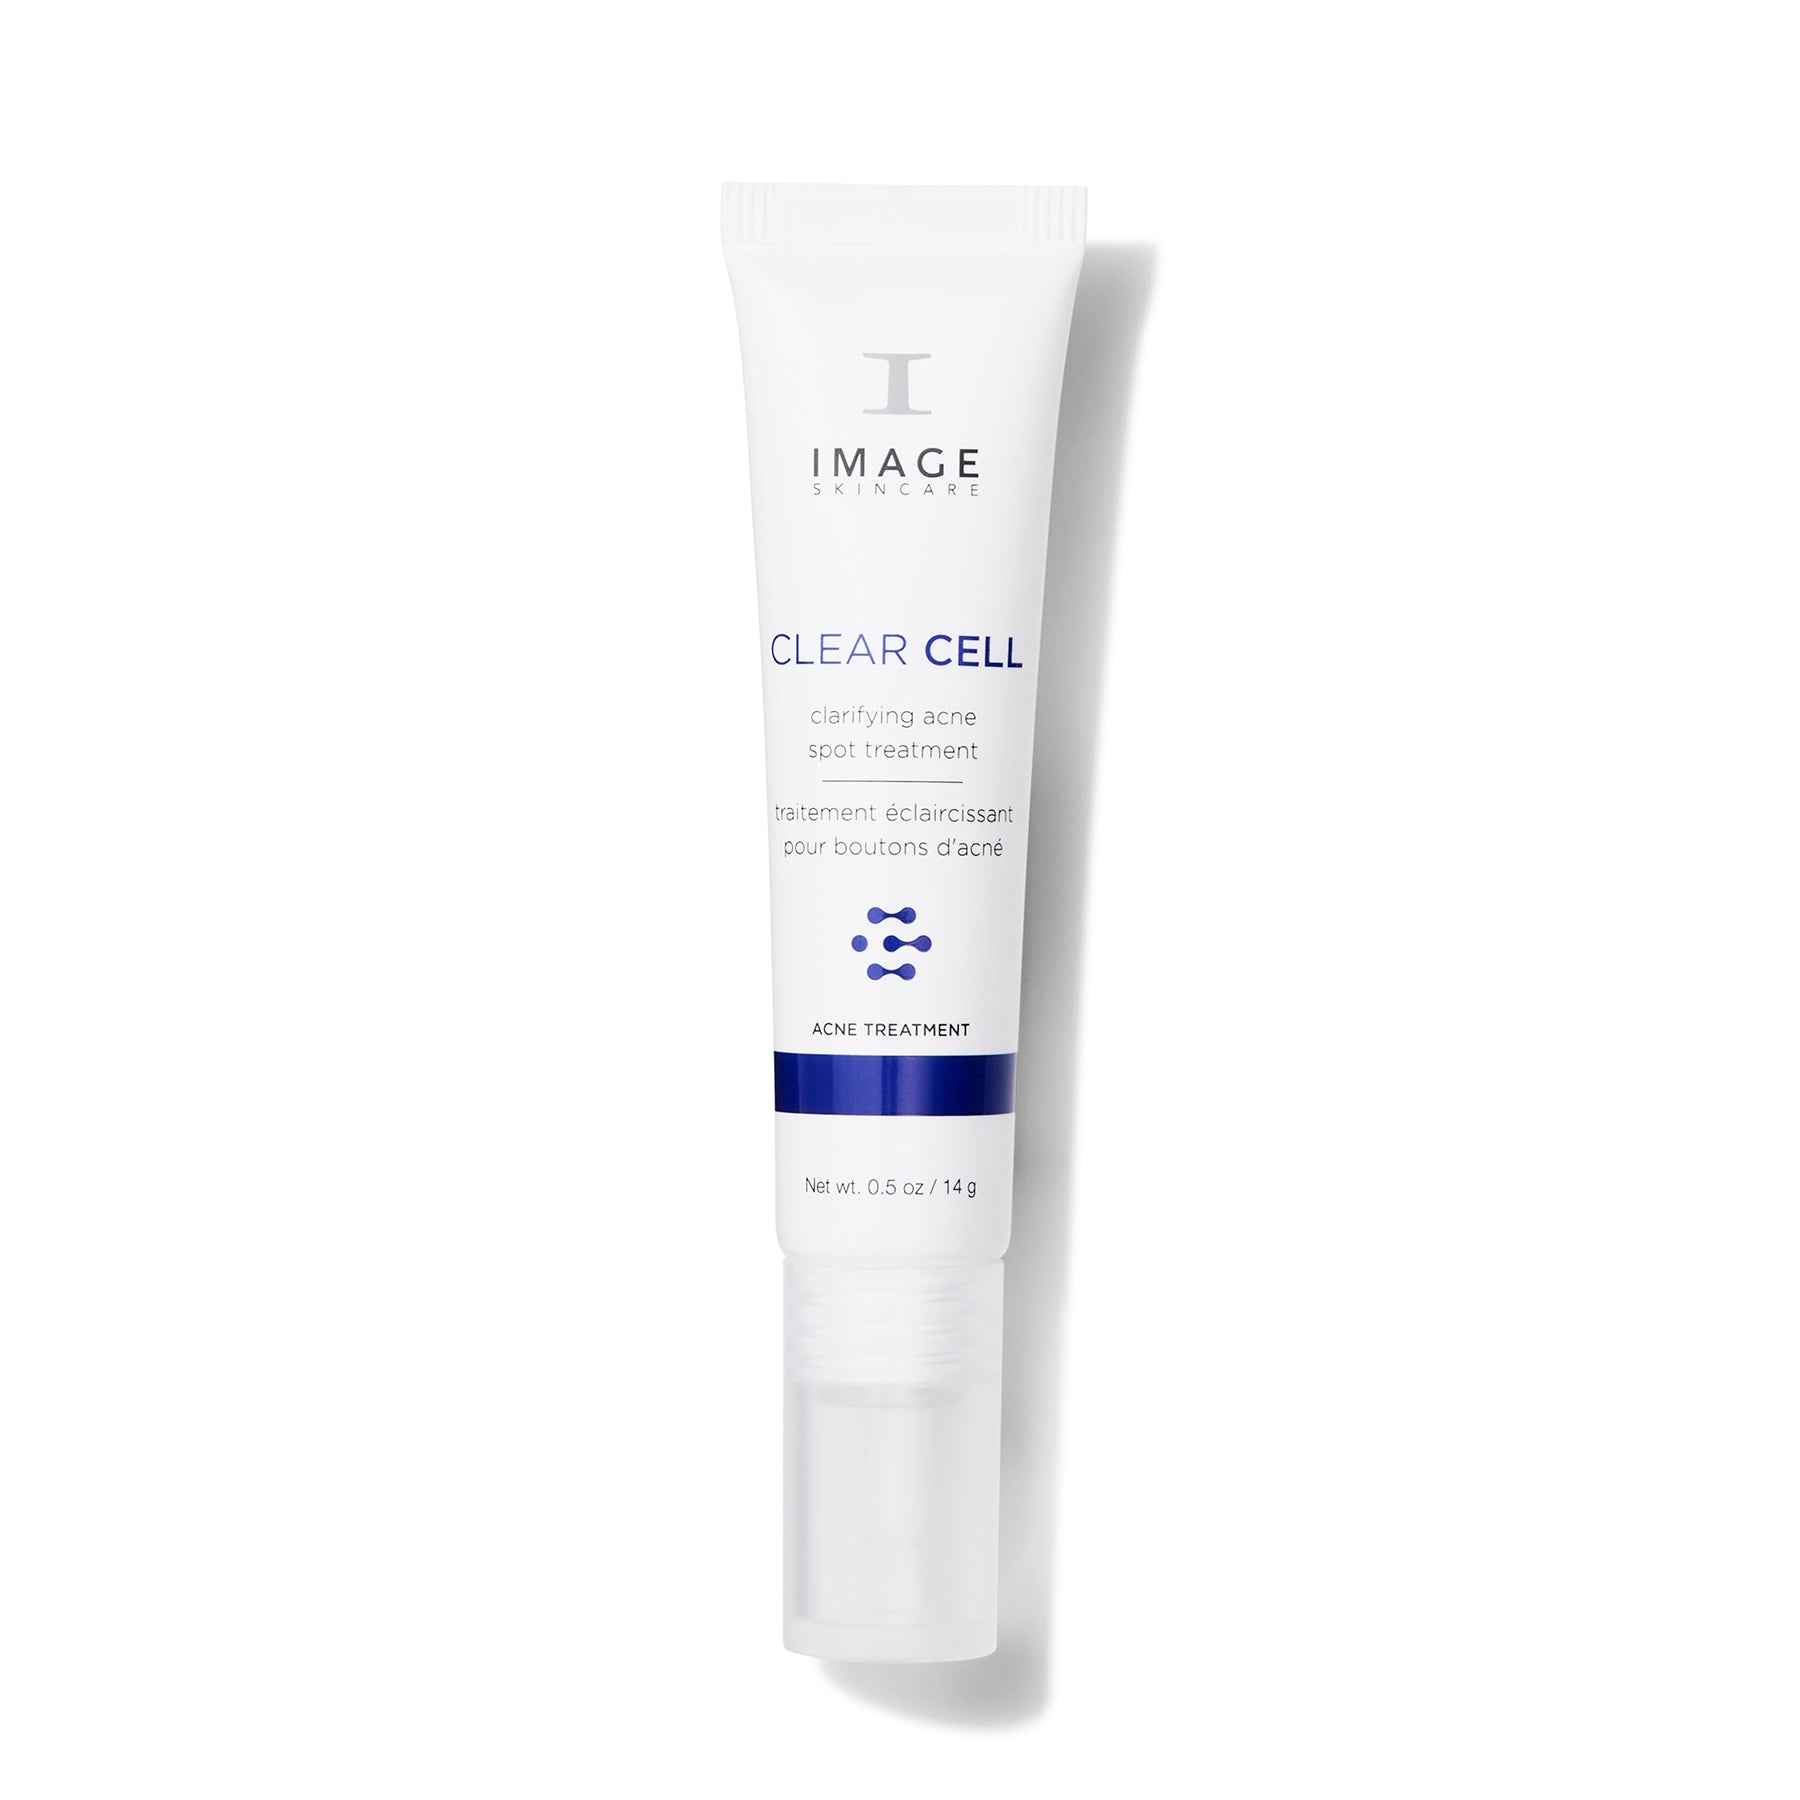 Image Skincare Clear Cell Clarifying Acne Spot Treatment Shop At Exclusive Beauty